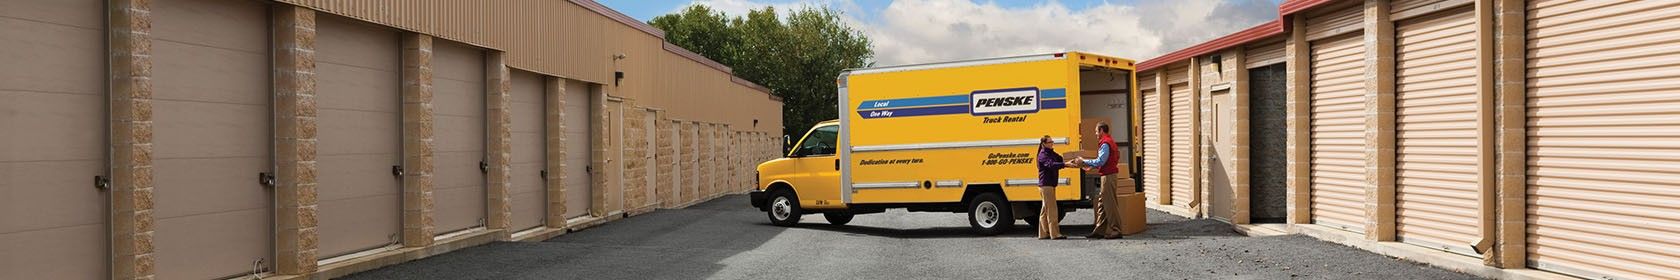 Moving services and storage with a penske moving truck